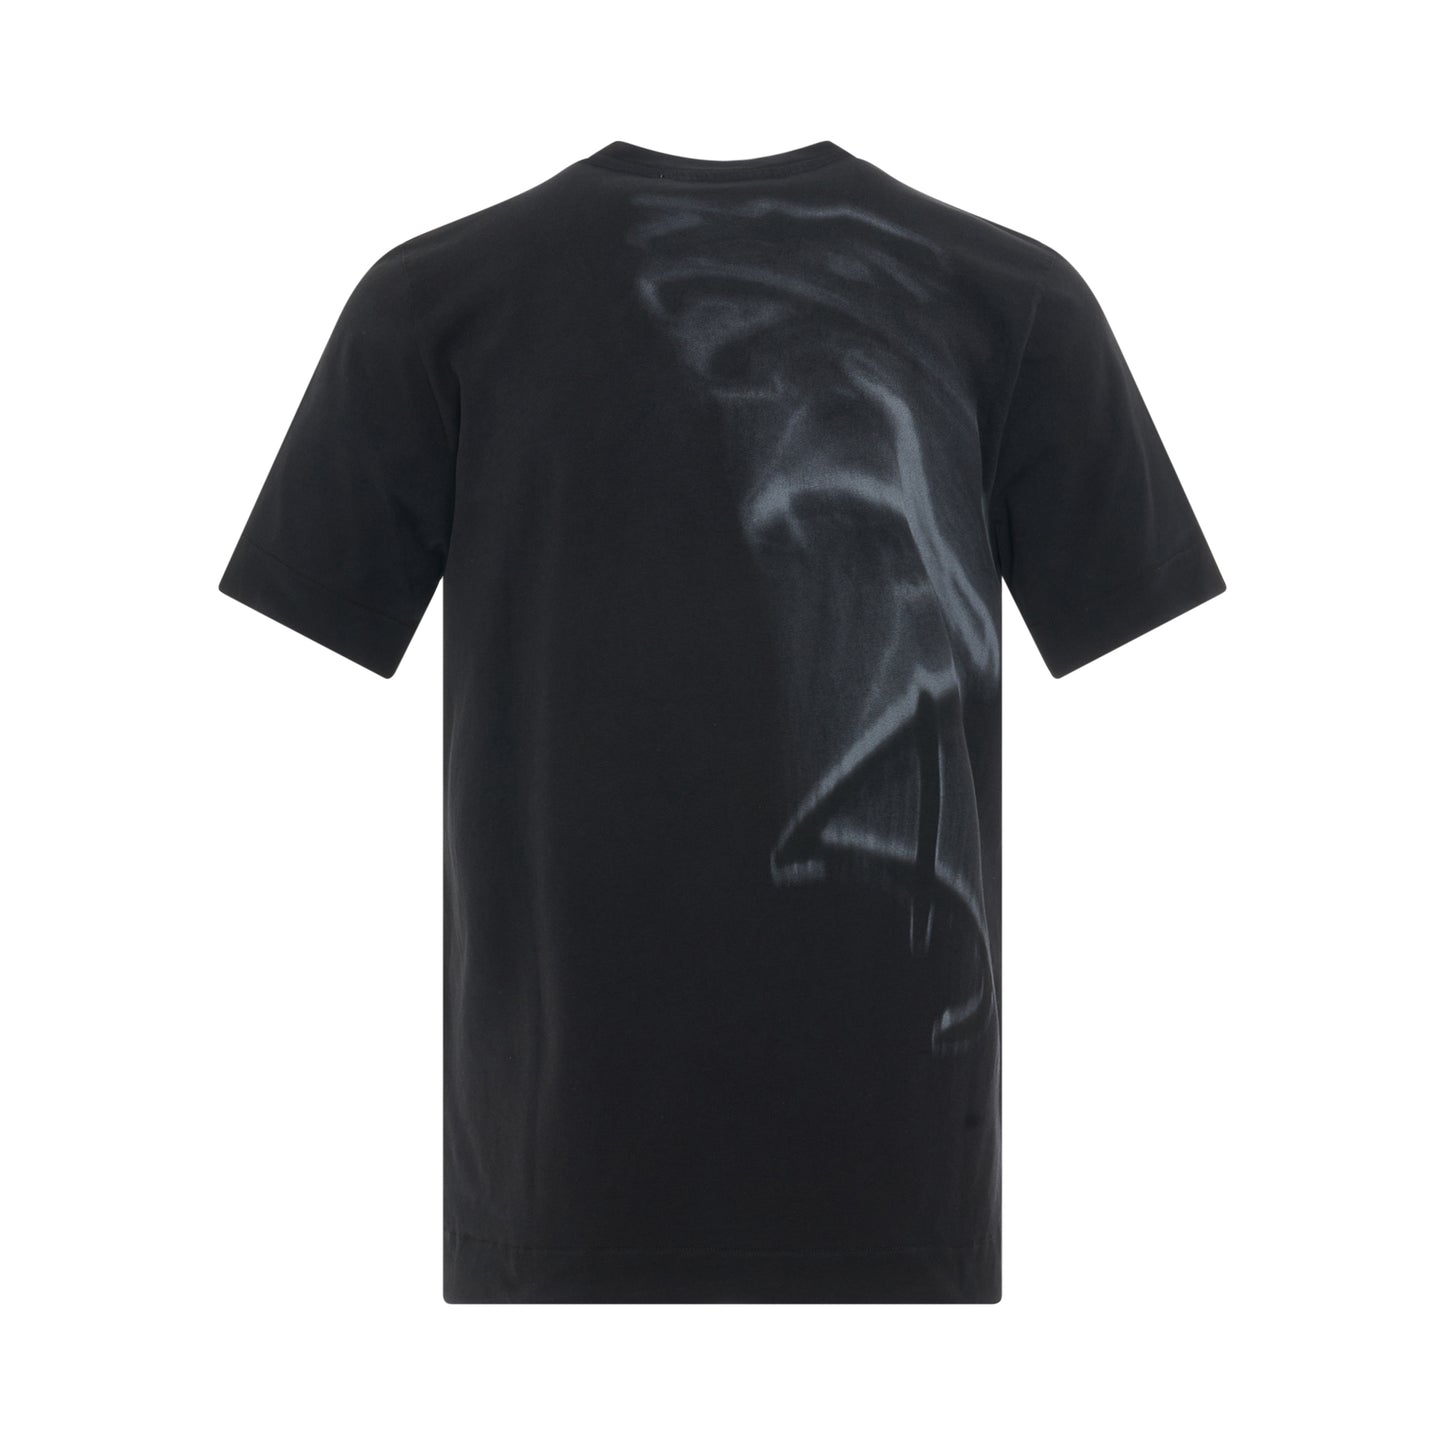 Graphic S/S T-Shirt in Black